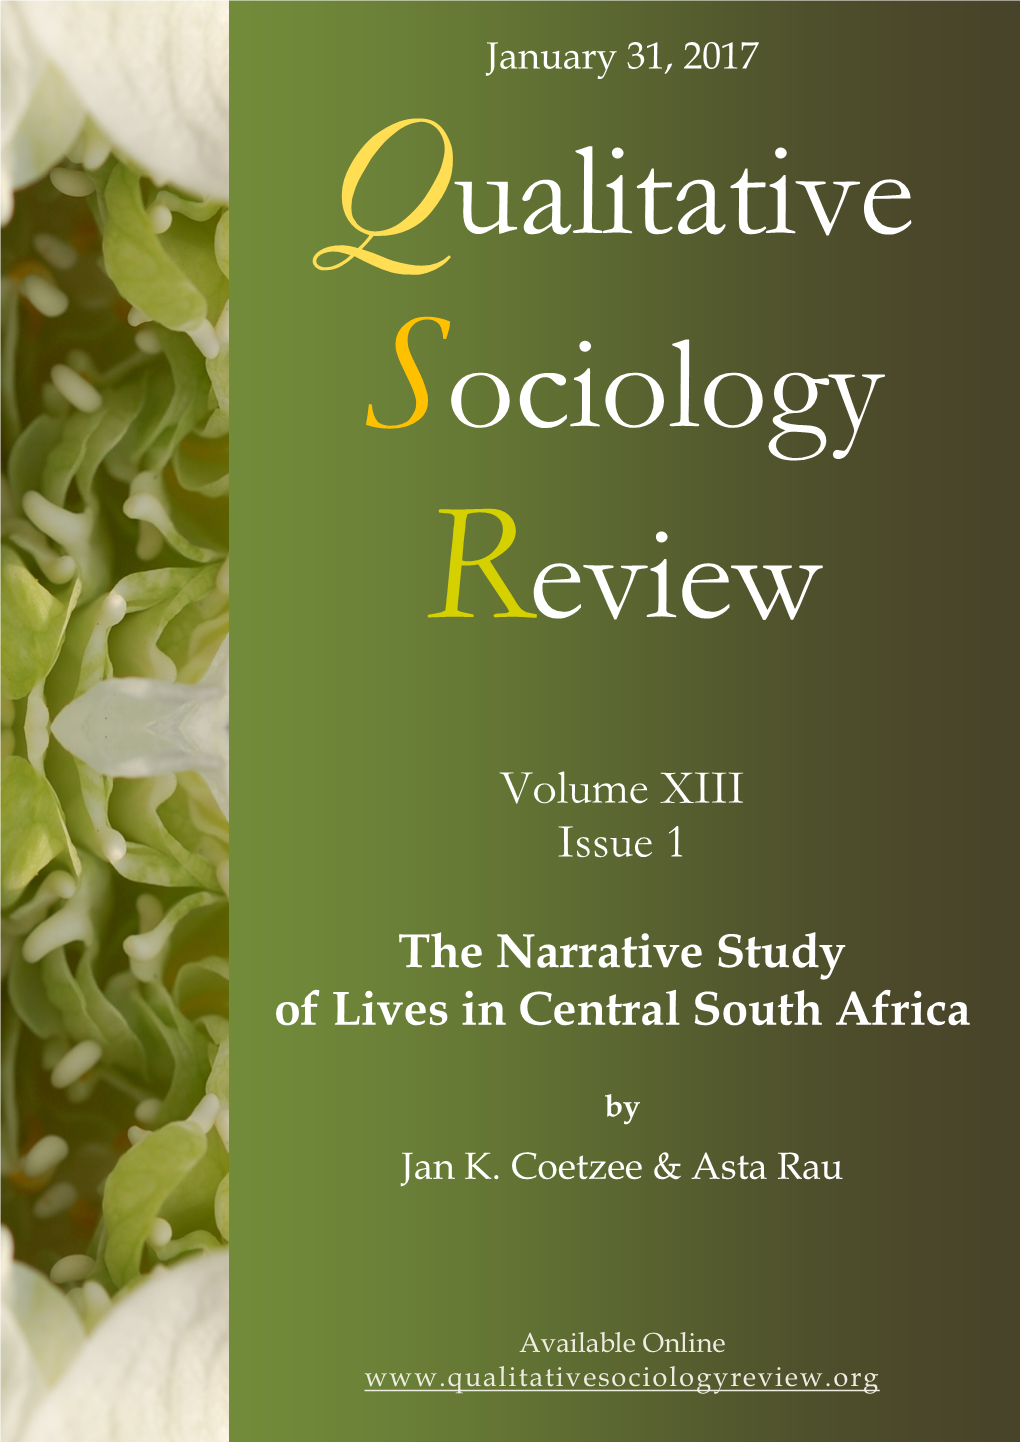 Volume XIII Issue 1 the Narrative Study of Lives in Central South Africa